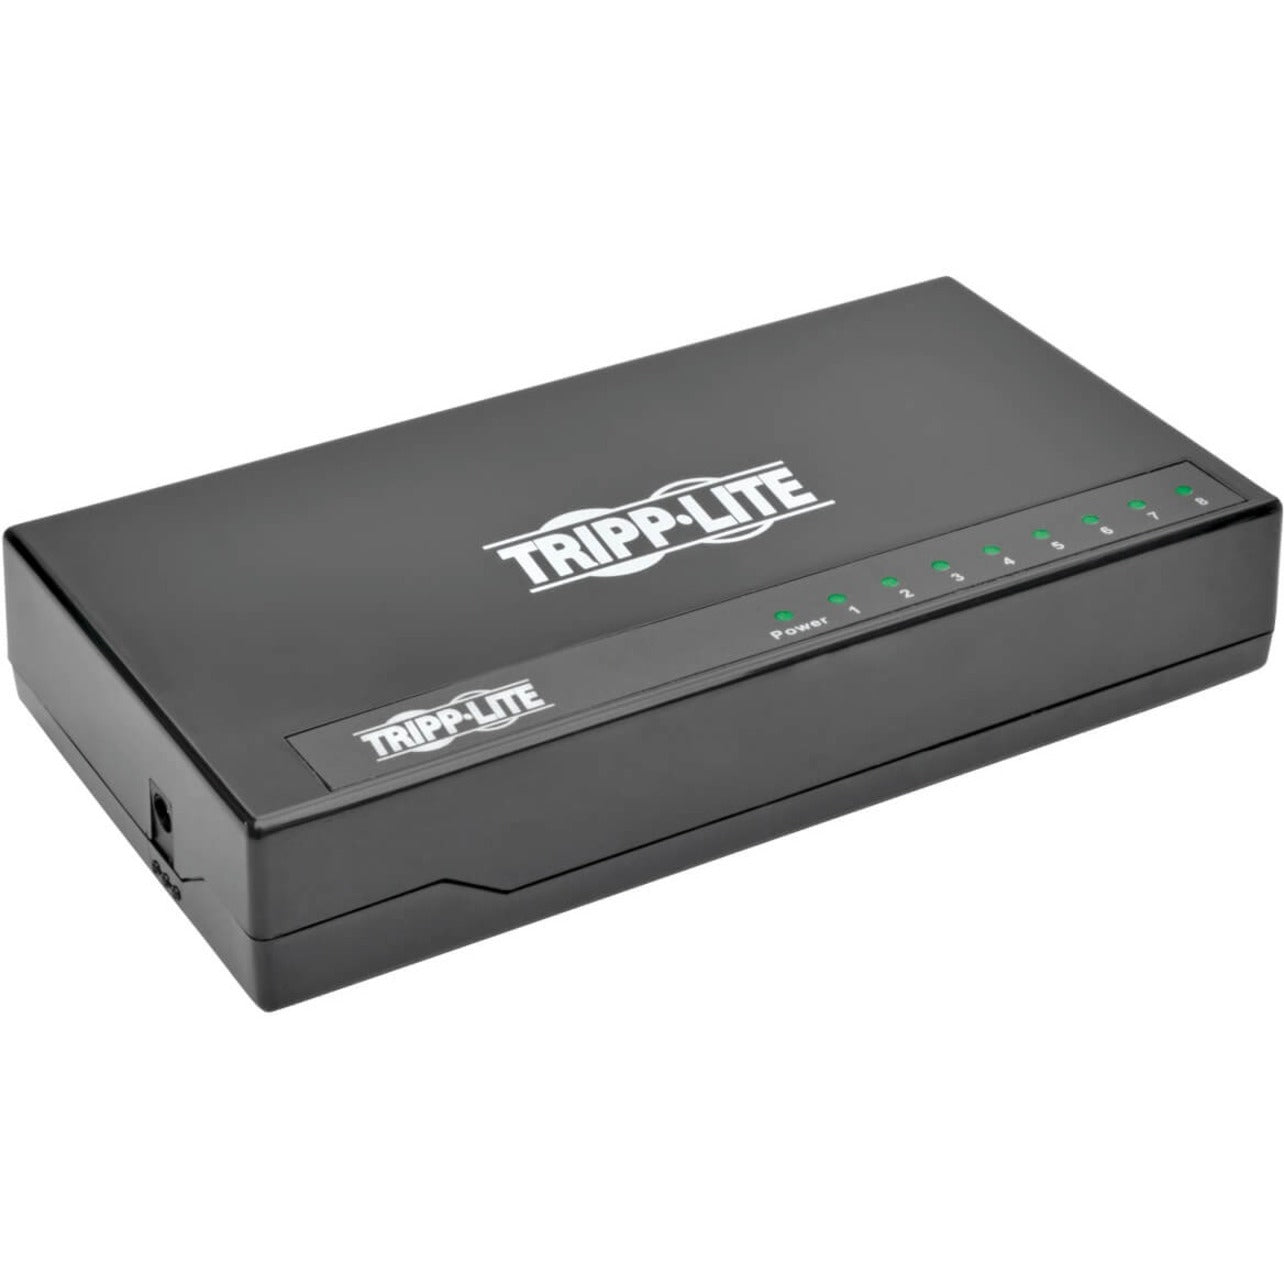 Tripp Lite - トリップライト NG8P - NG8P 8-Port - 8ポート 10/100/1000 Mbps - 10/100/1000 Mbps Desktop - デスクトップ Gigabit Ethernet - ギガビットイーサネット Unmanaged Switch - 管理対象スイッチ 5-Year Warranty - 5年間の保証 RoHS Certified - RoHS認定